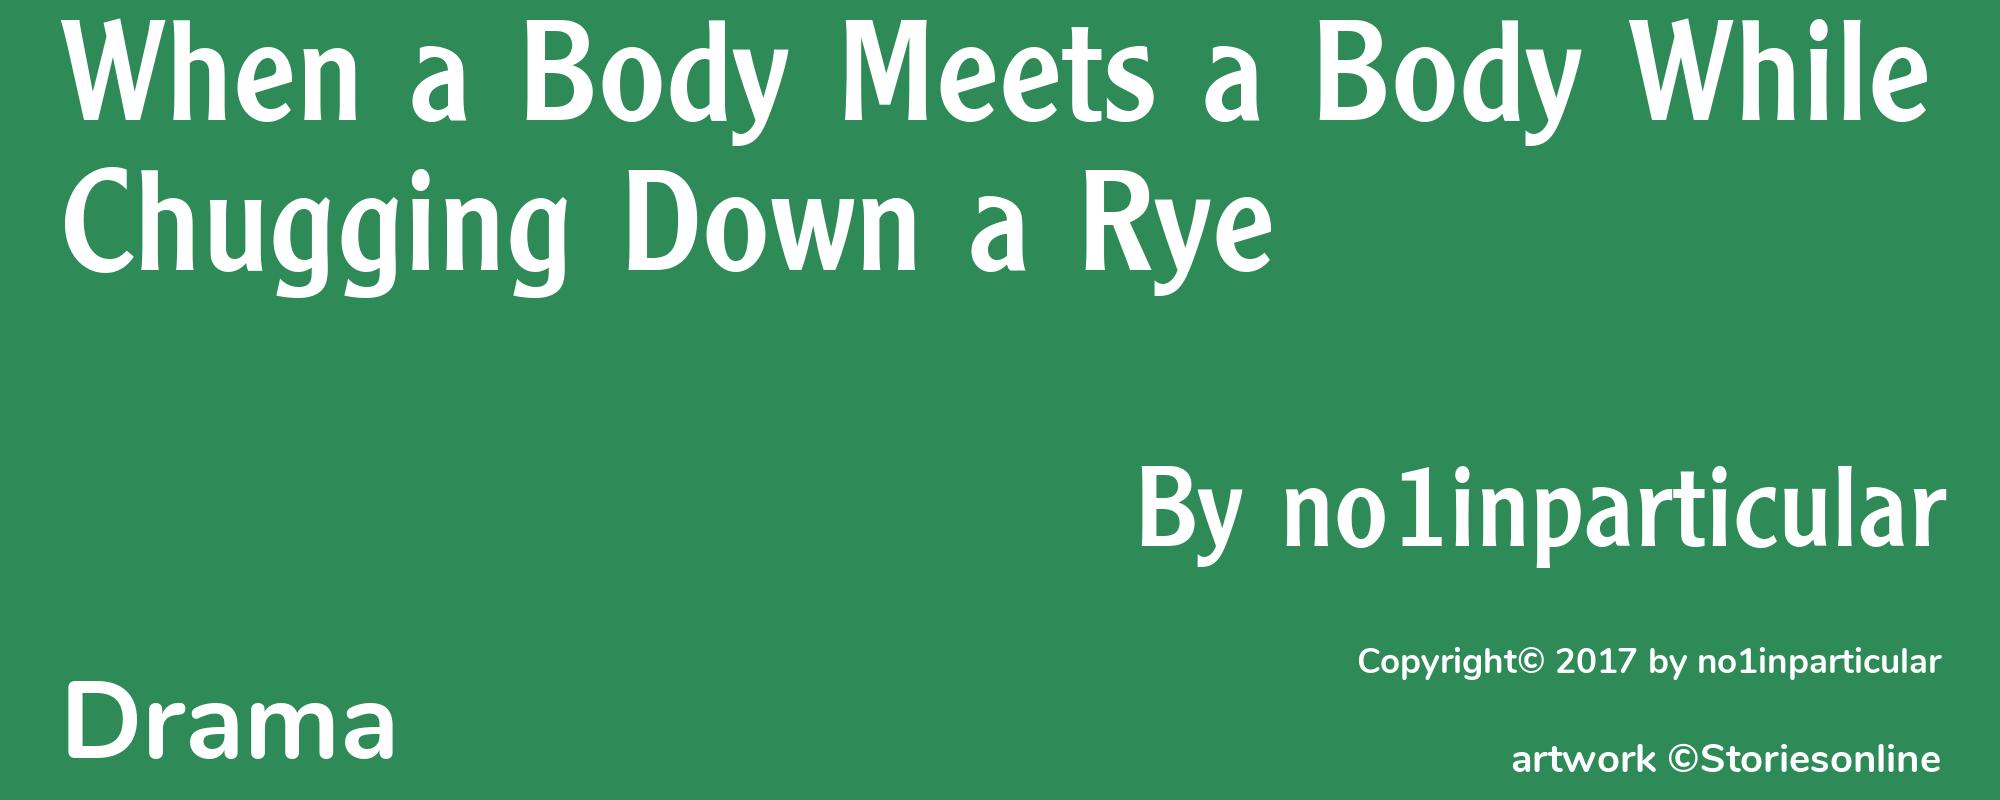 When a Body Meets a Body While Chugging Down a Rye - Cover